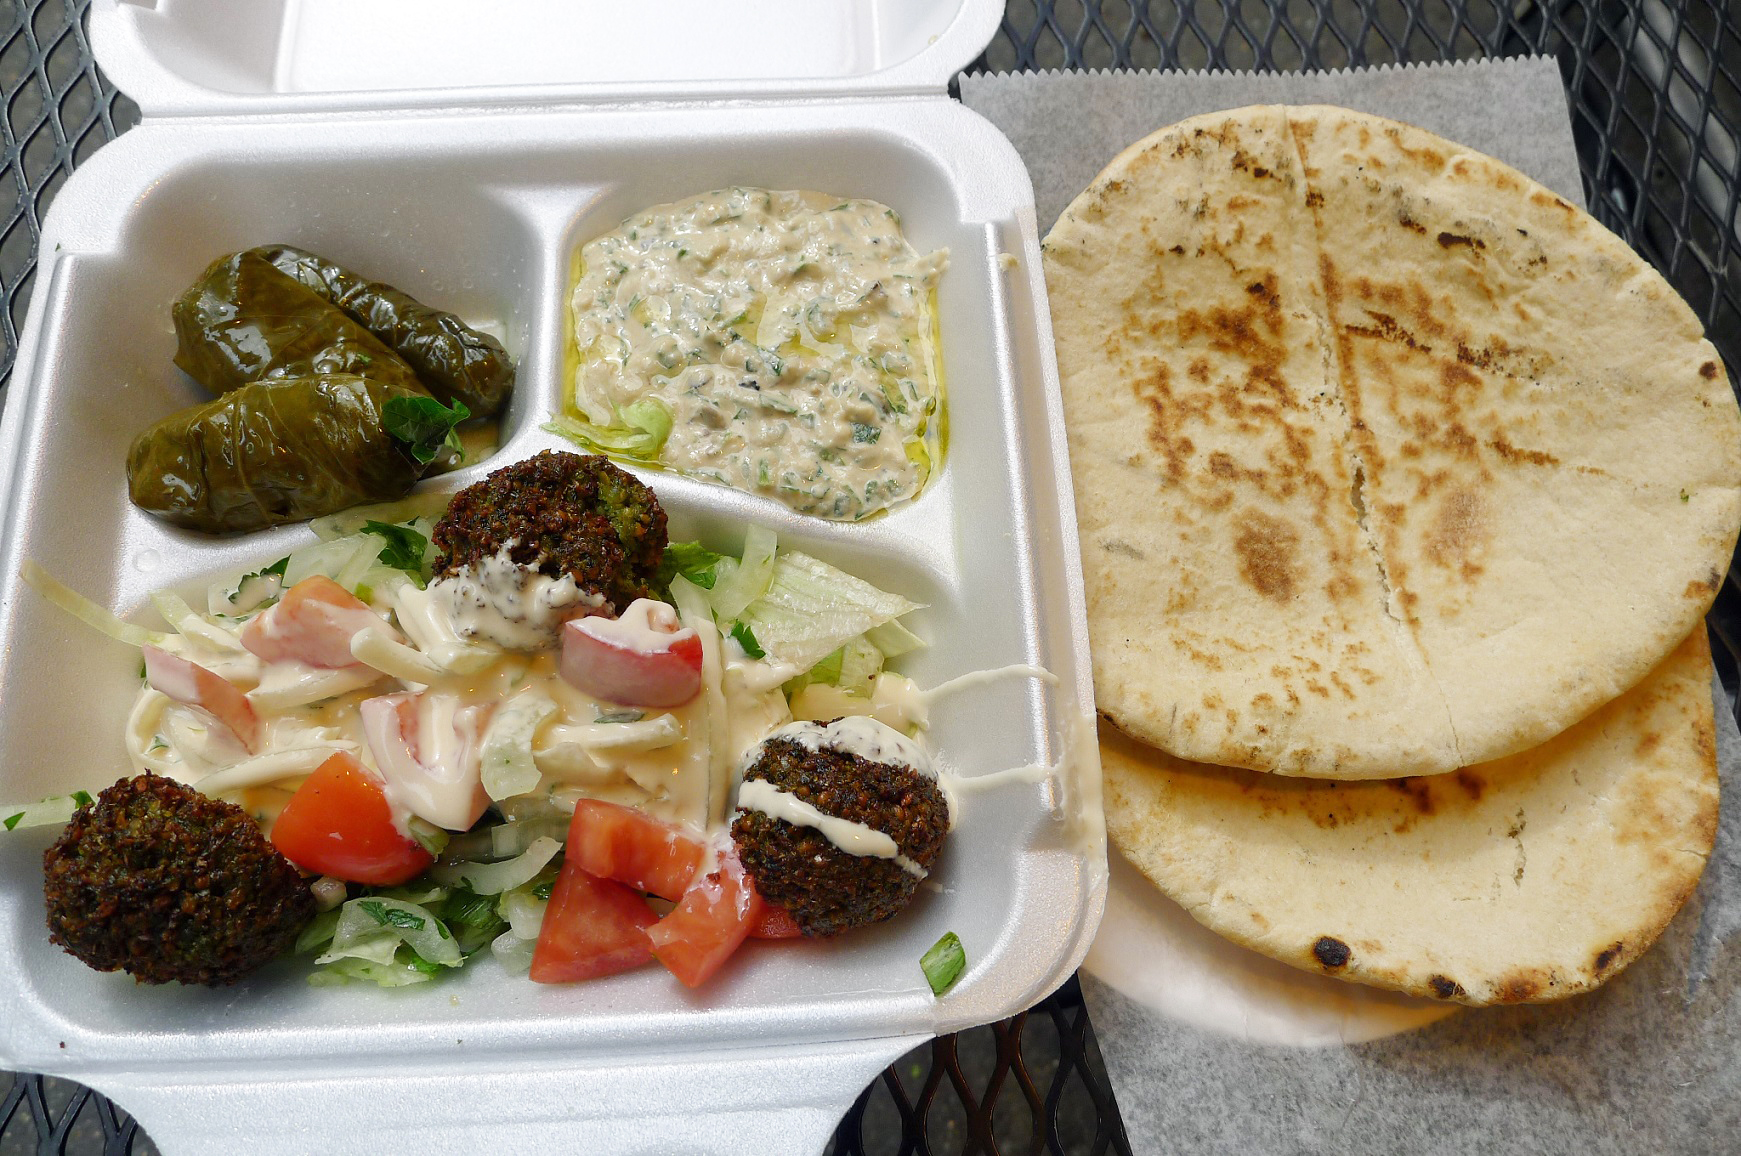 A styrofoam takeout container overflows with dolmas, falafel, and other dishes beside a stack of fluffy pita.